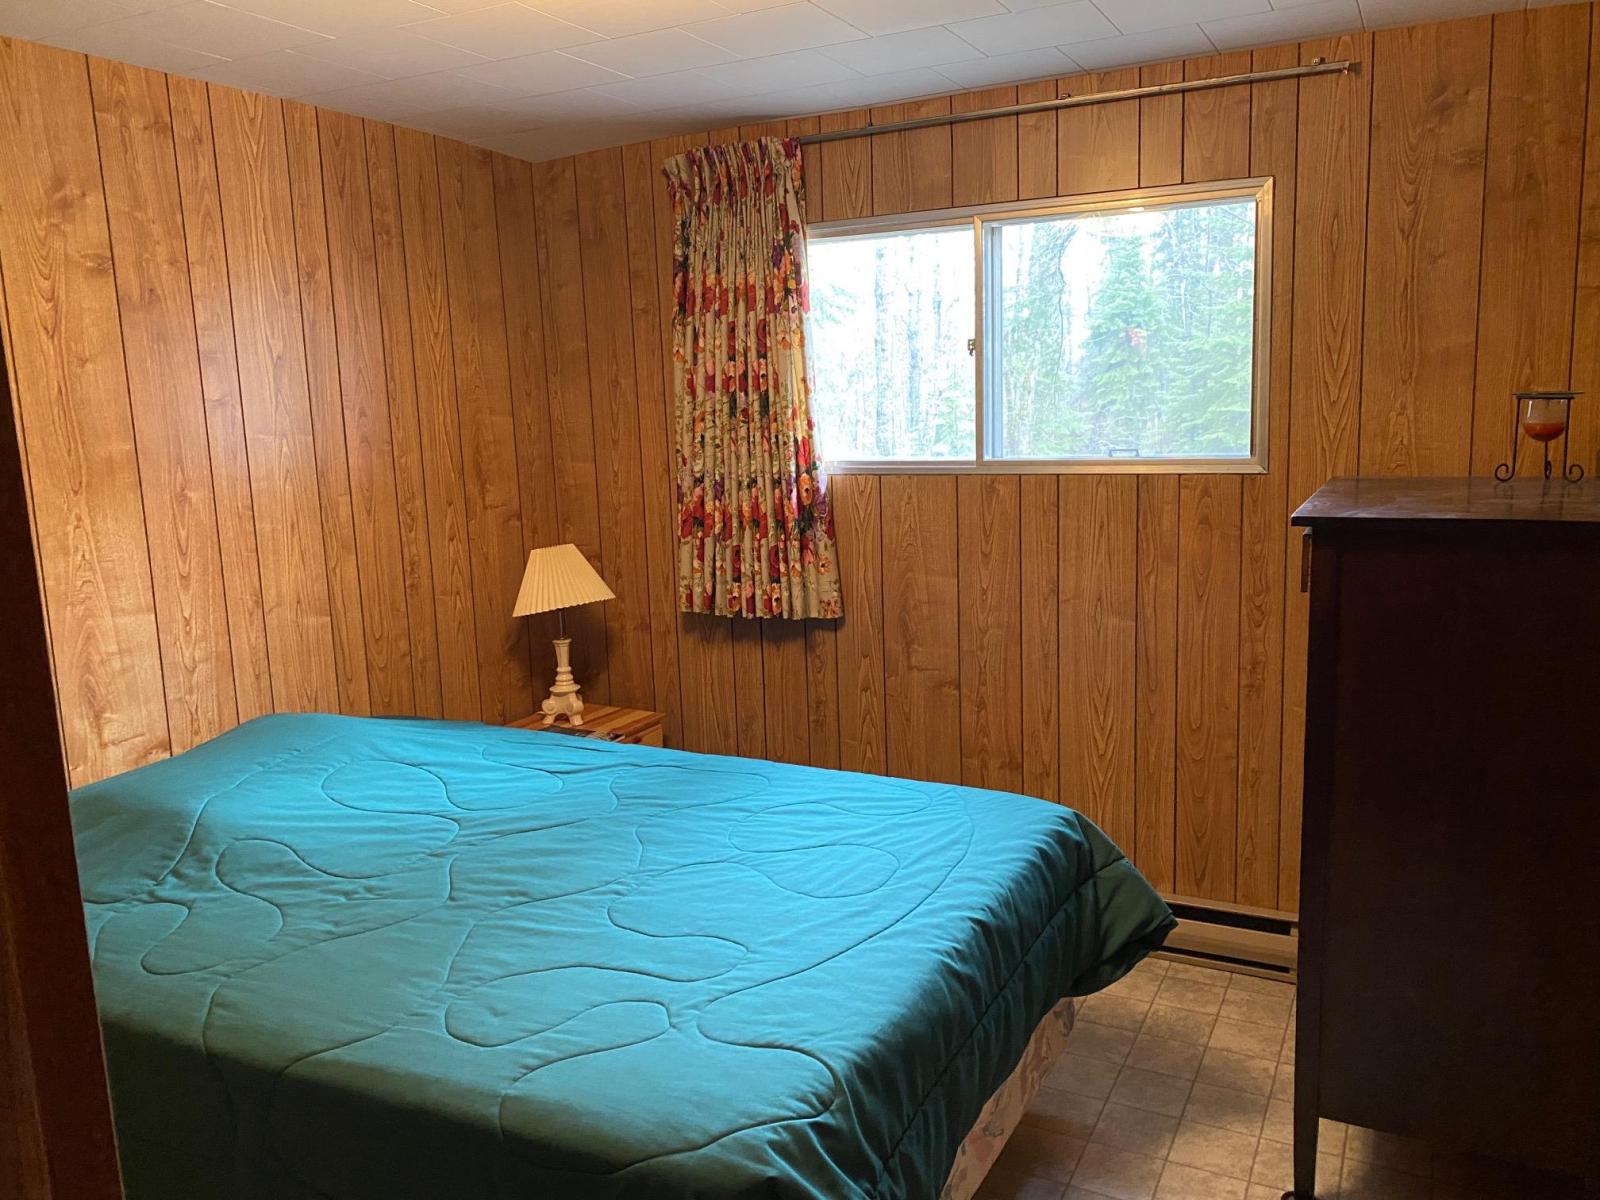 Falcon Lake Back Lot for Sale - South Shore - View of Bedroom